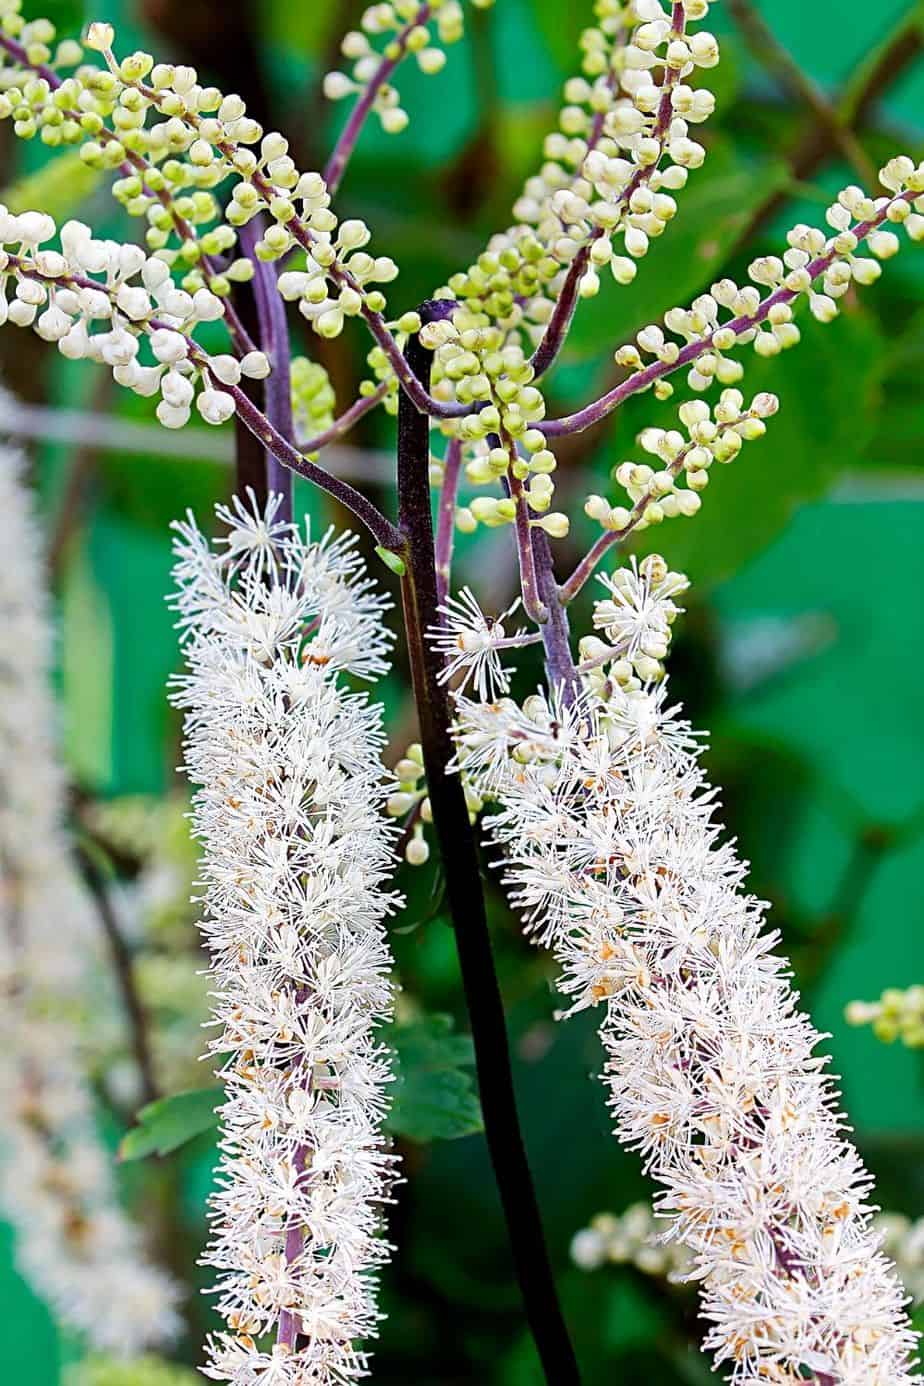 The Black Bugbane's dark-colored makes it stand out in a northeast-facing garden